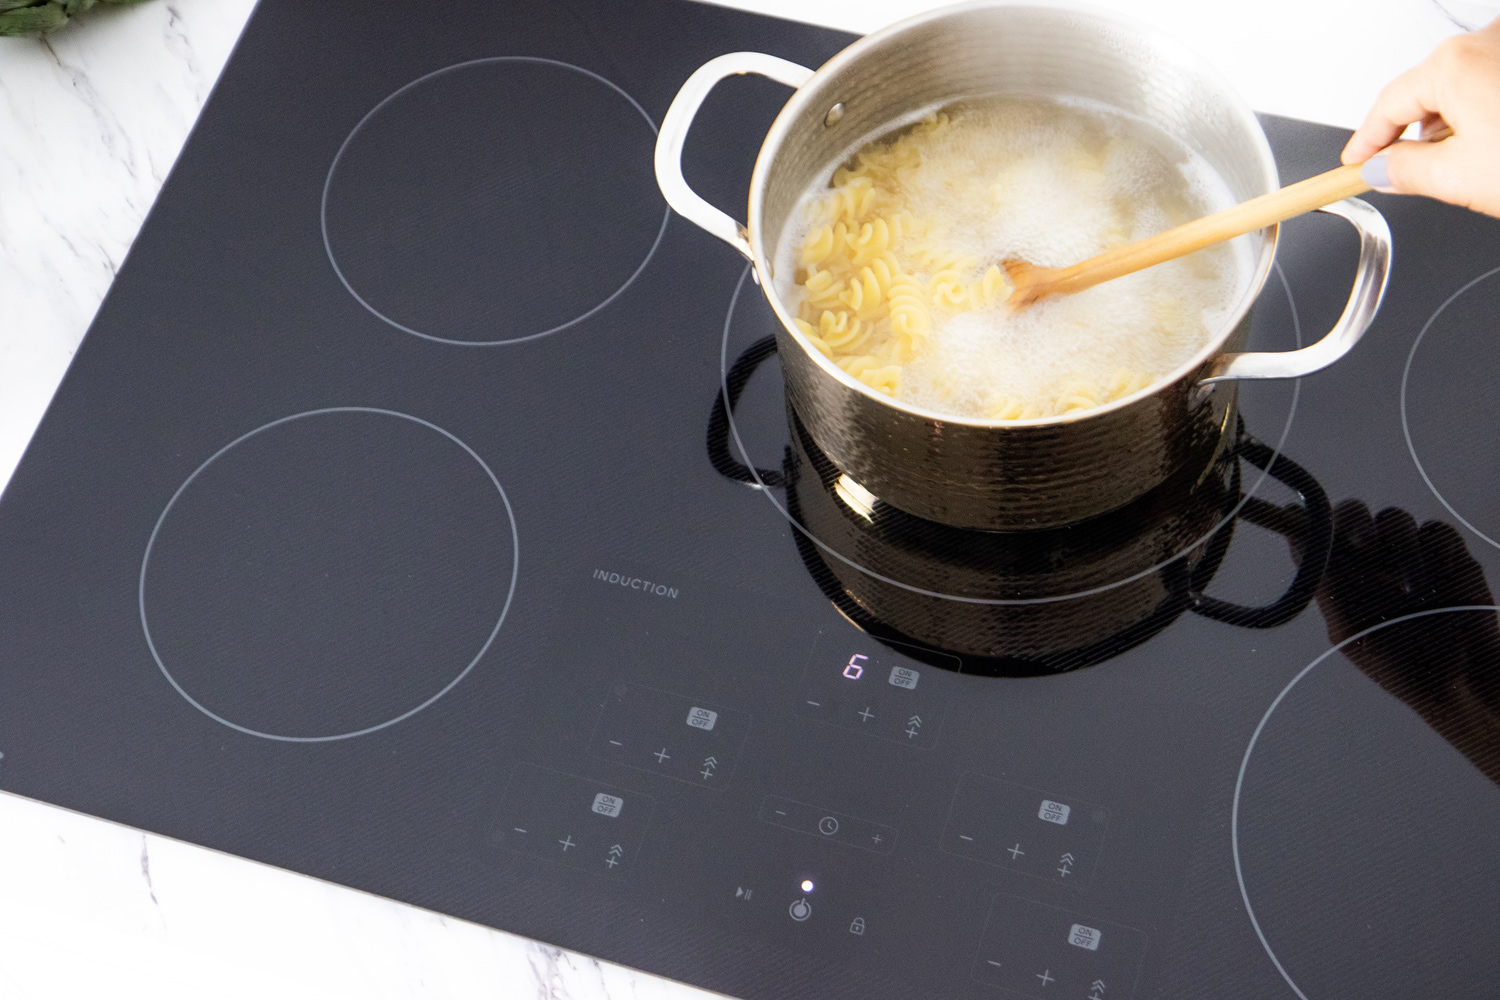 Induction Cooker with Cooking Pot